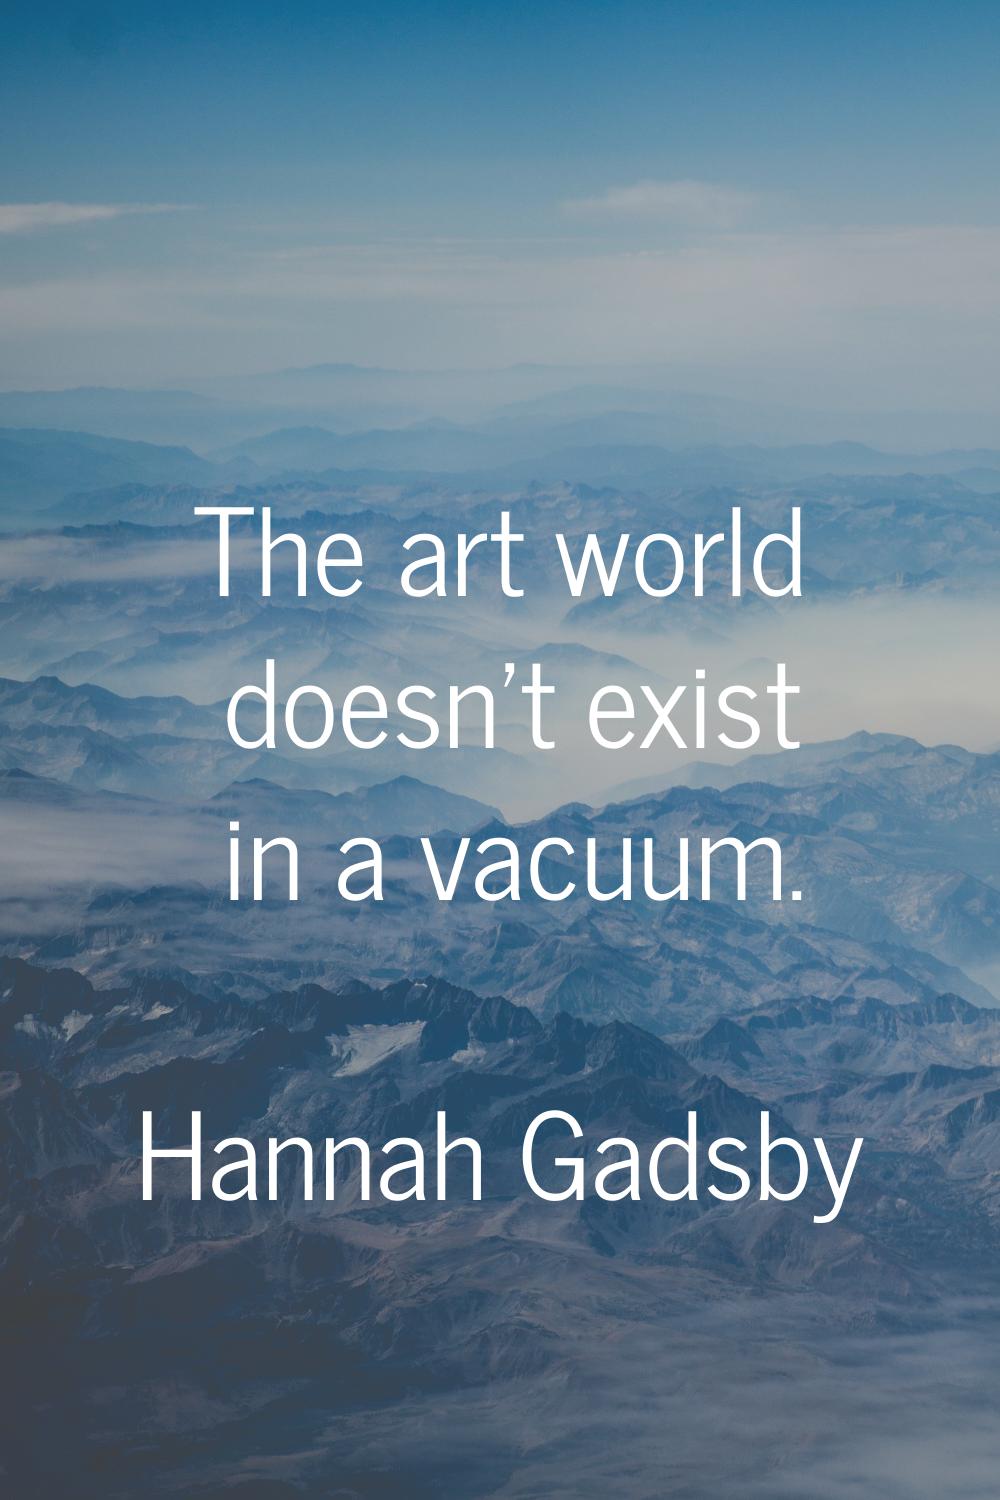 The art world doesn't exist in a vacuum.